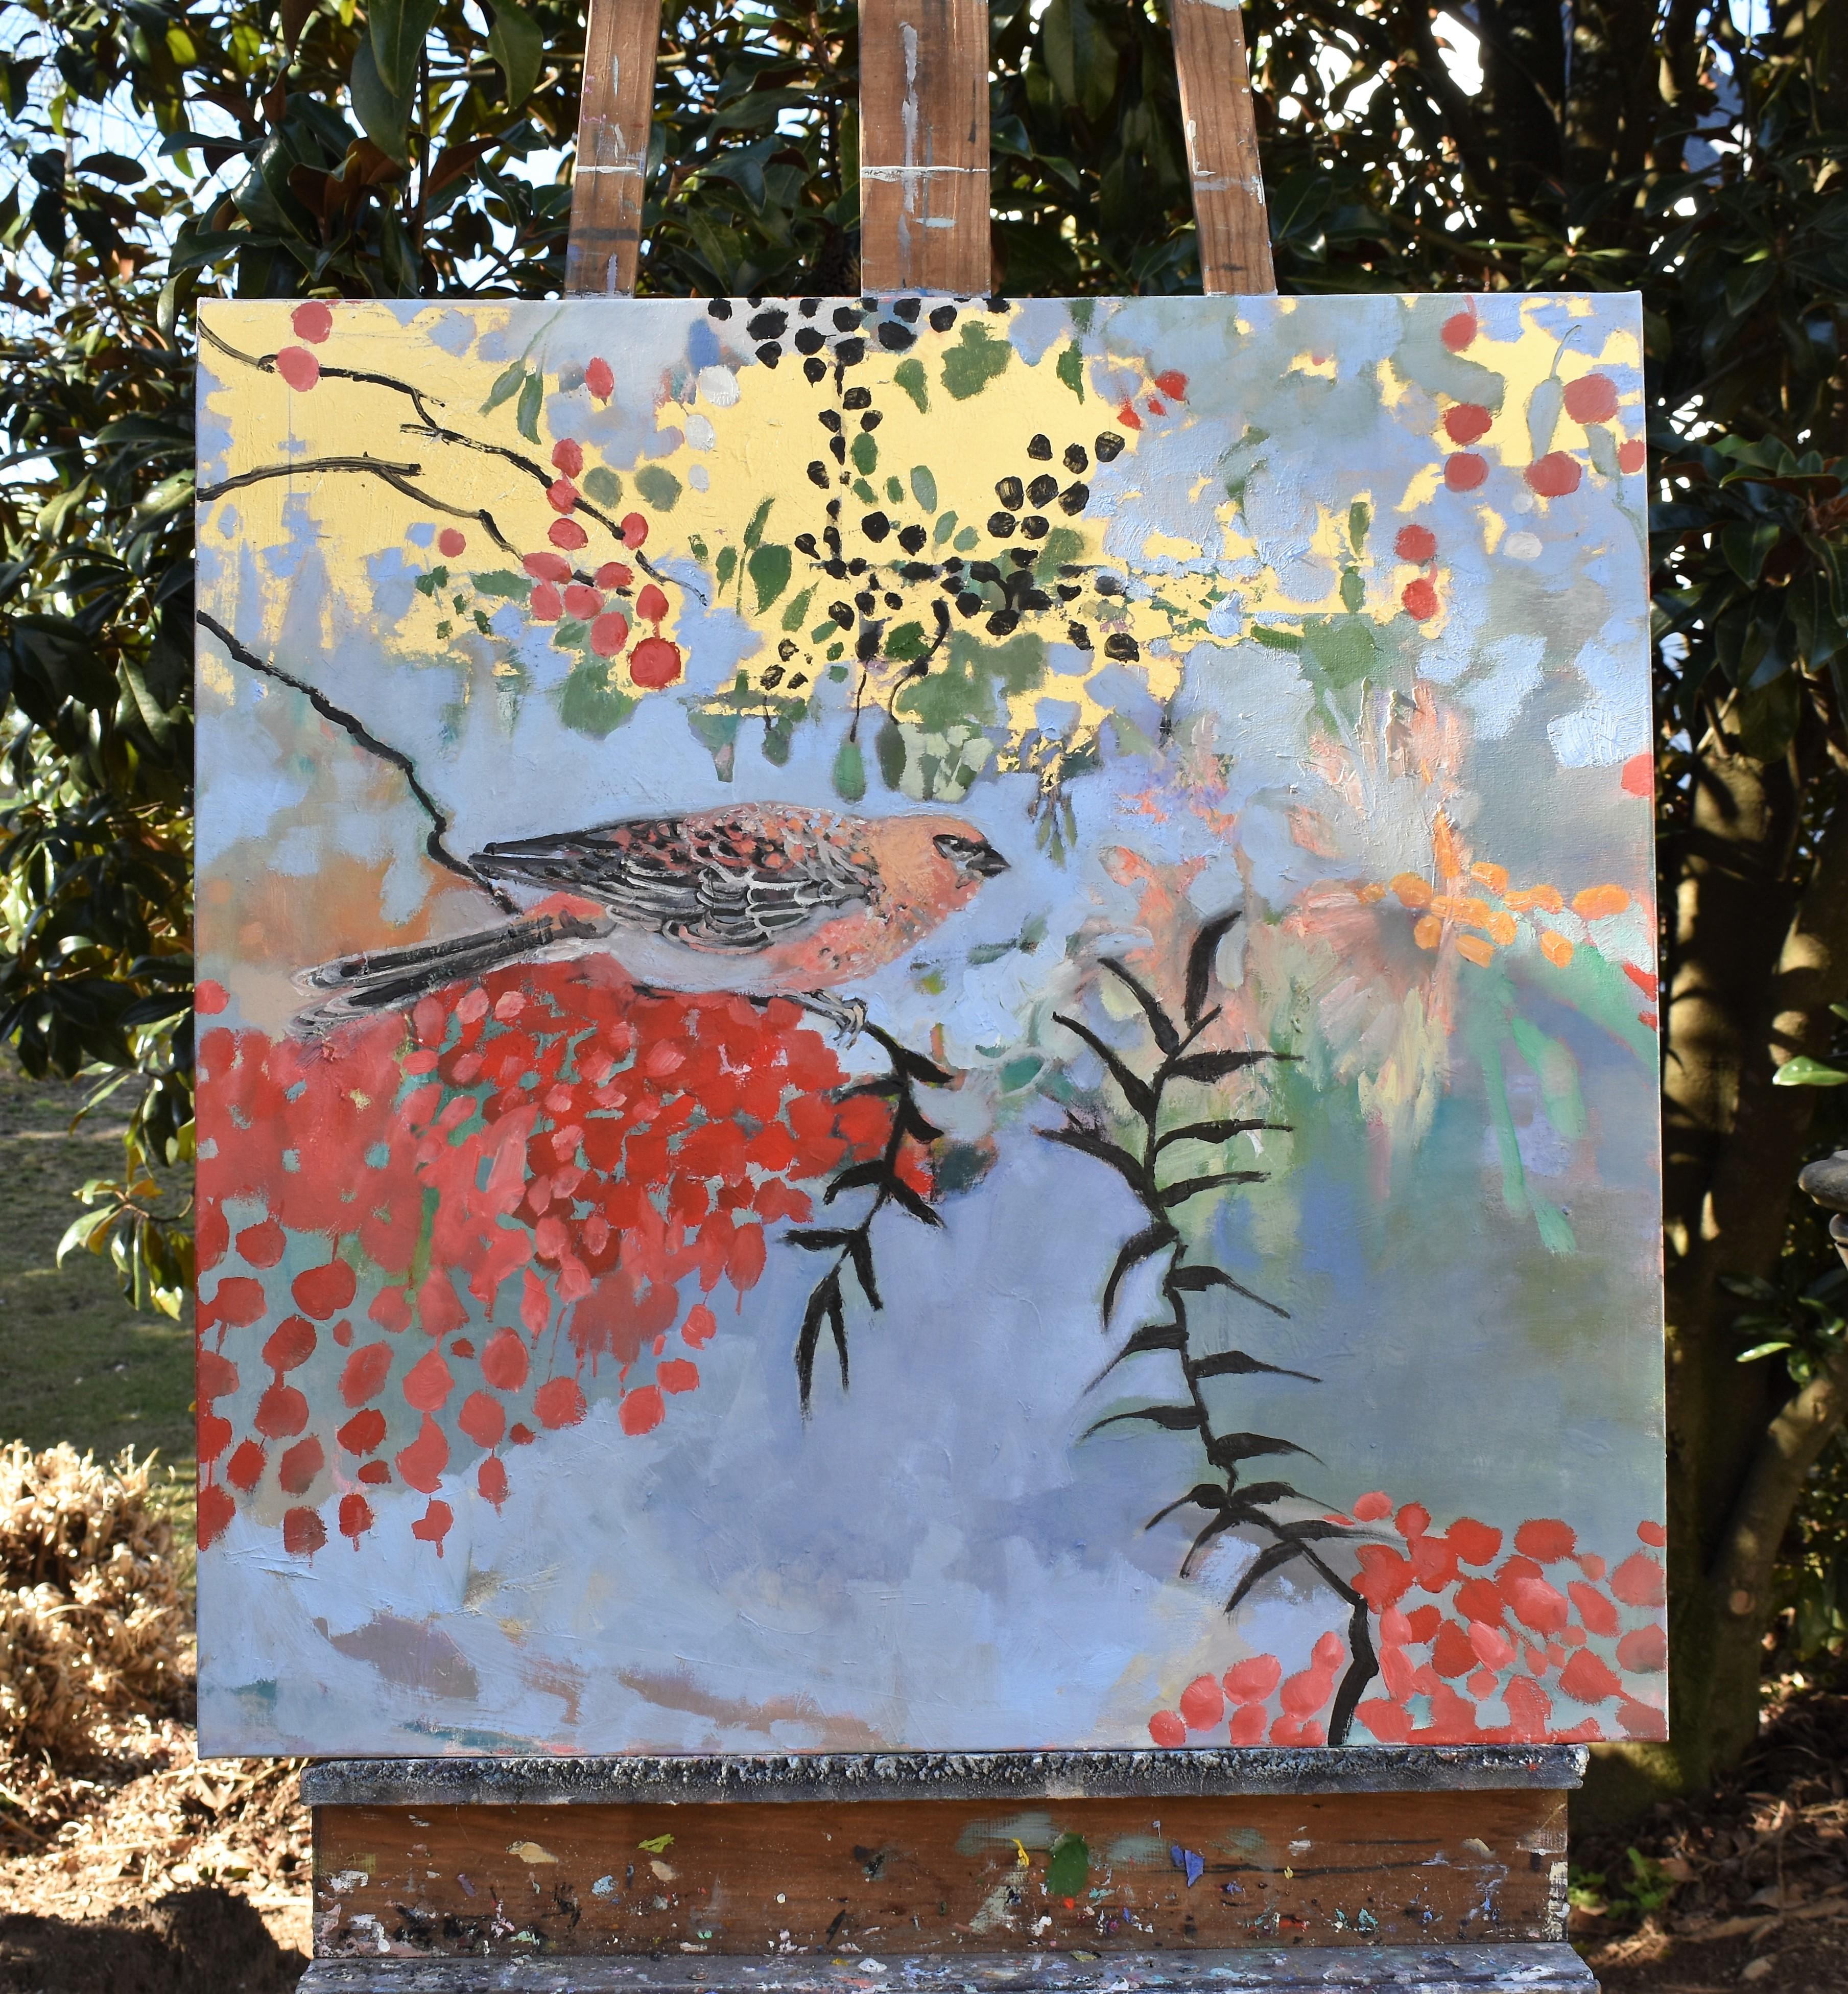 <p>Artist Comments<br>Artist Mary Pratt paints a surreal expressionist habitat surrounding a brightly colored bird perched on a branch. She believes birds are earthly showstoppers and captures them as such. These animals enhance our lives by